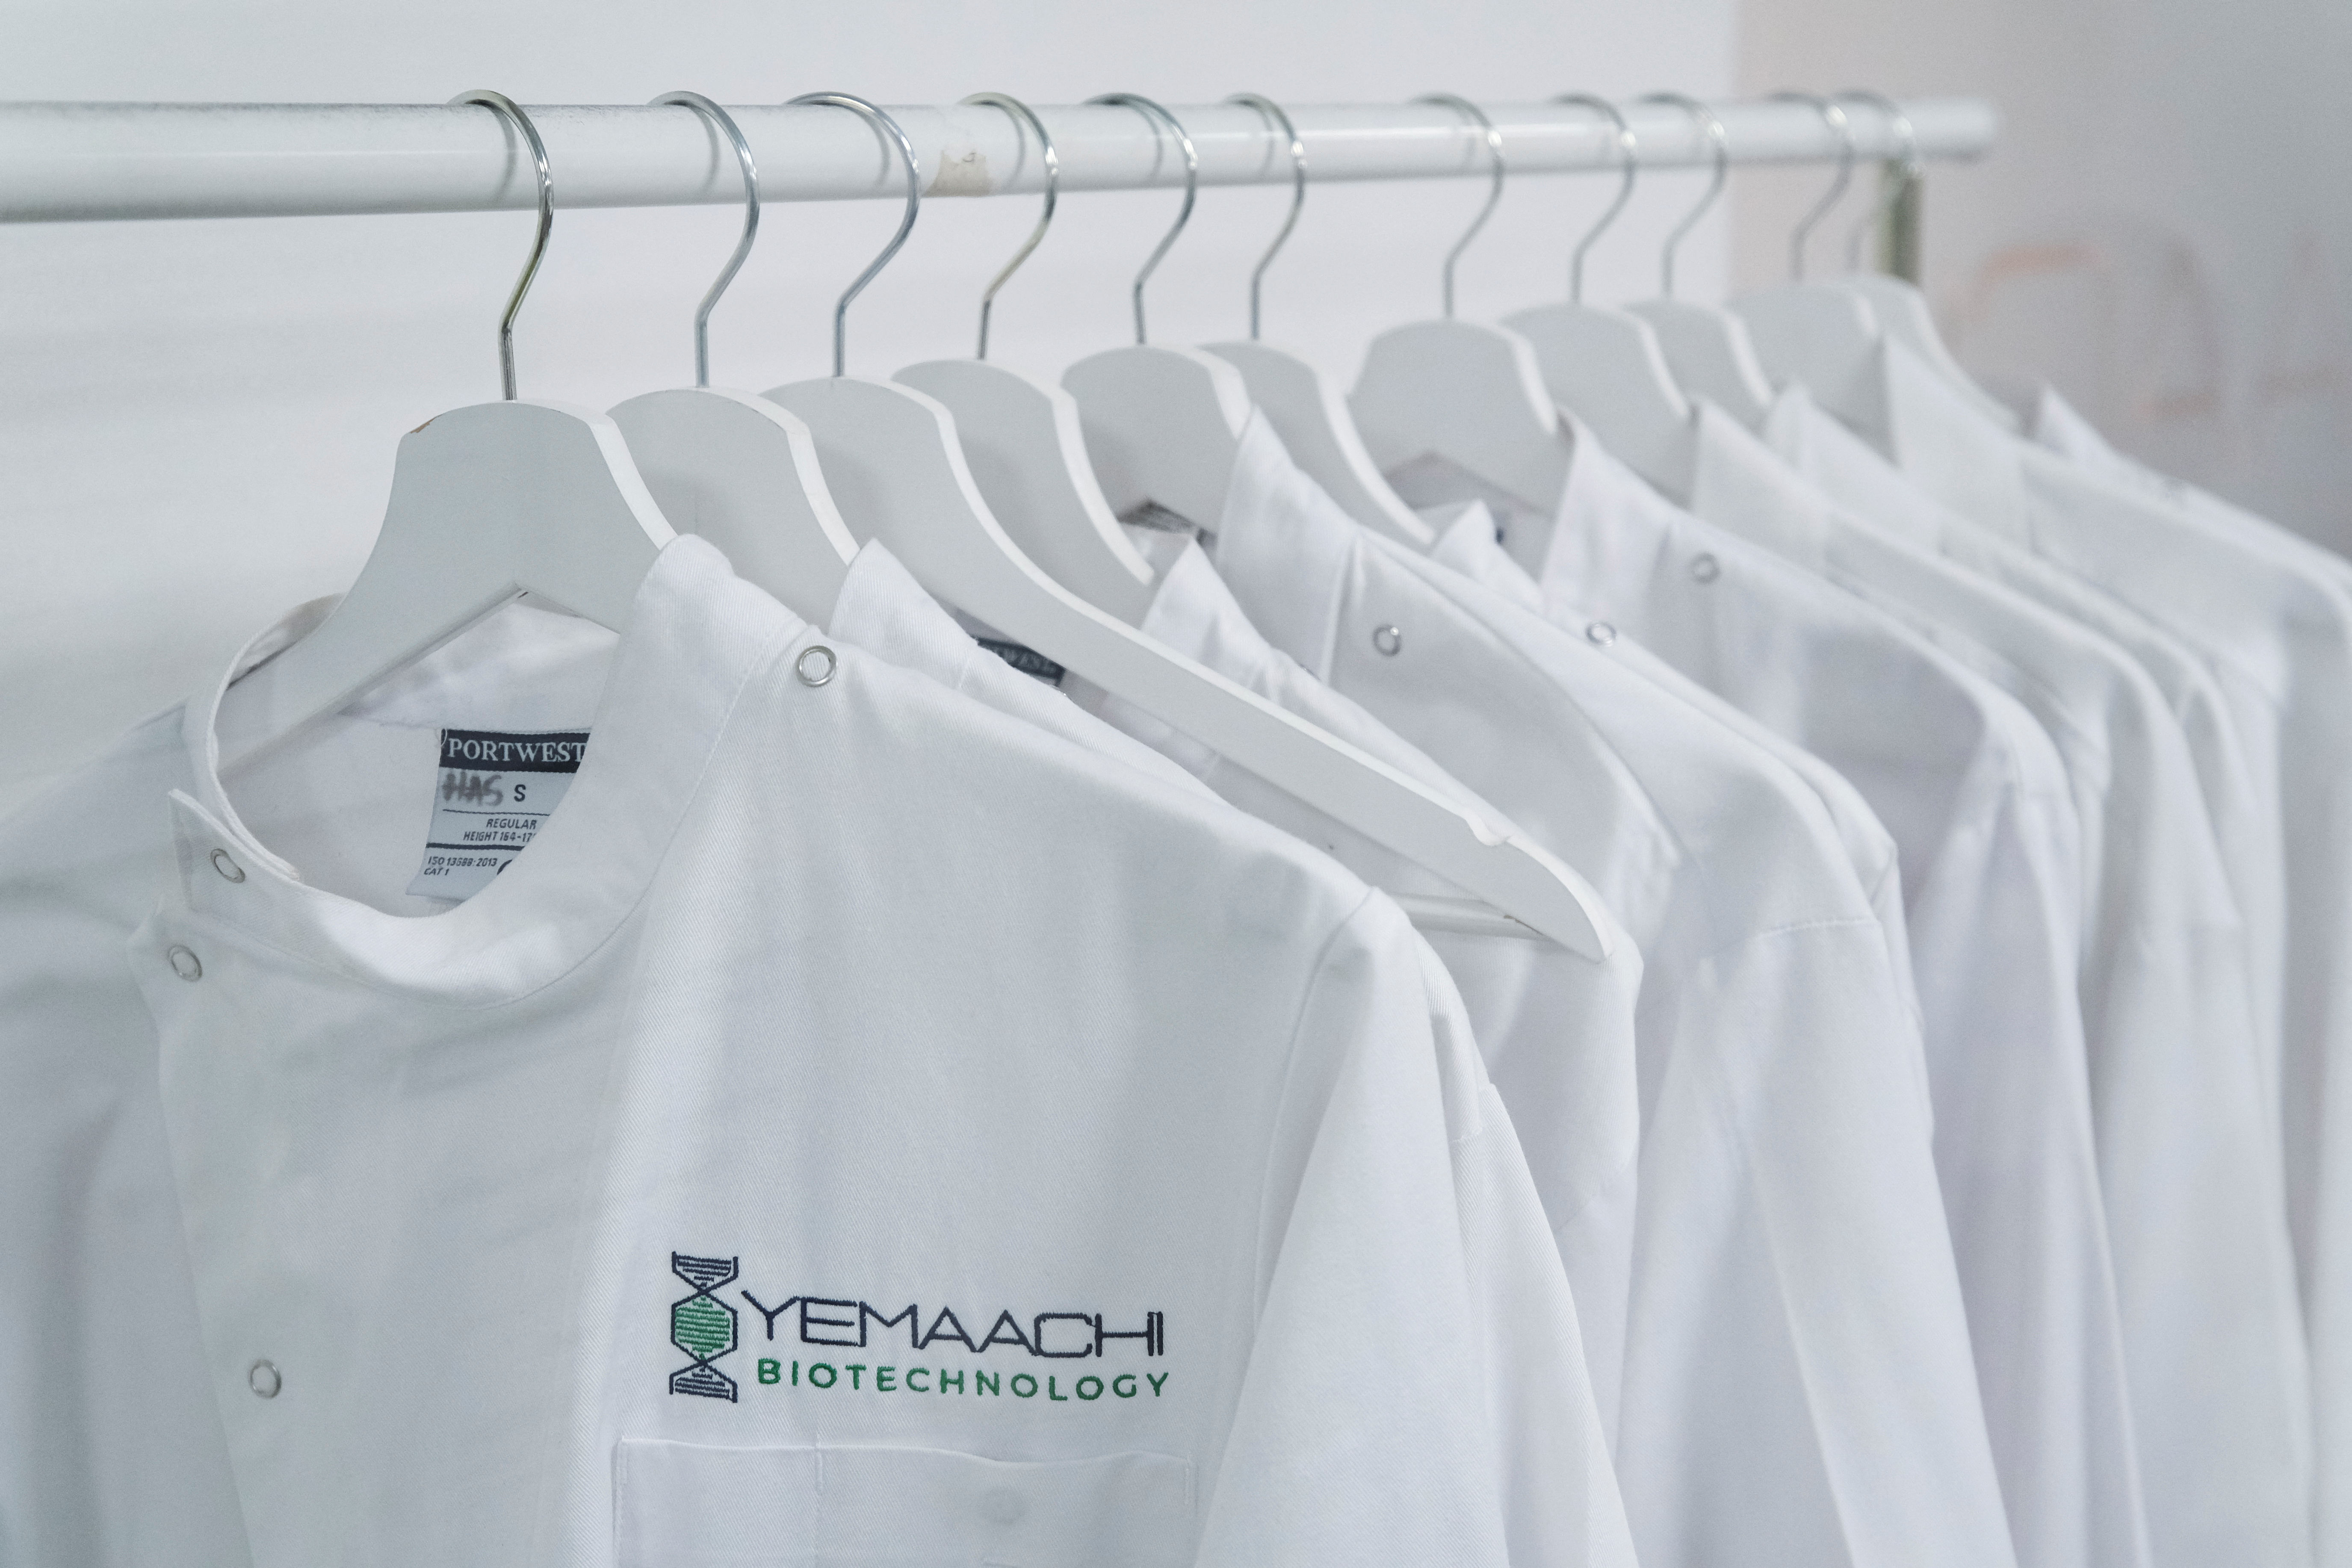 Staff lab coats hang on a rack at Yemaachi Biotechnology, a cancer research laboratory in Accra